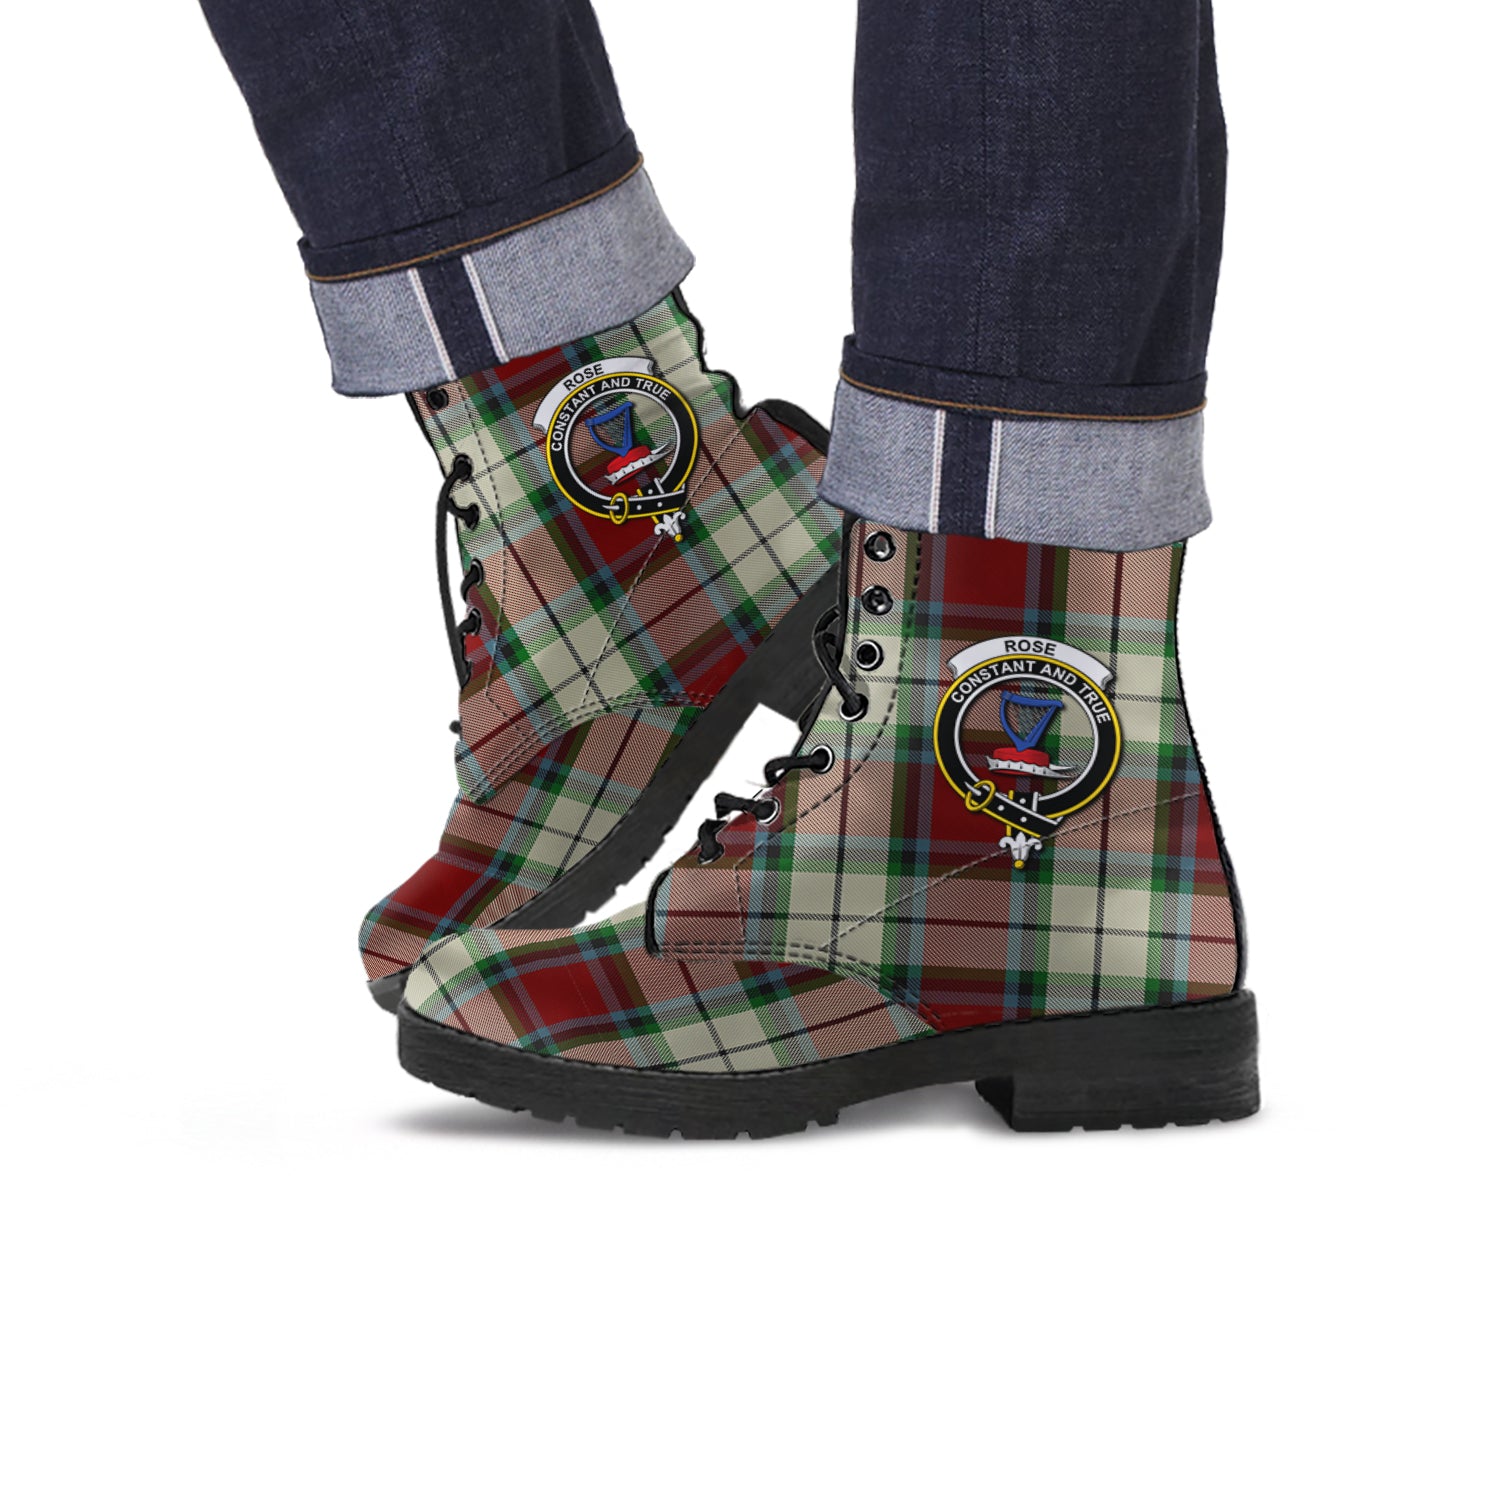 rose-white-dress-tartan-leather-boots-with-family-crest